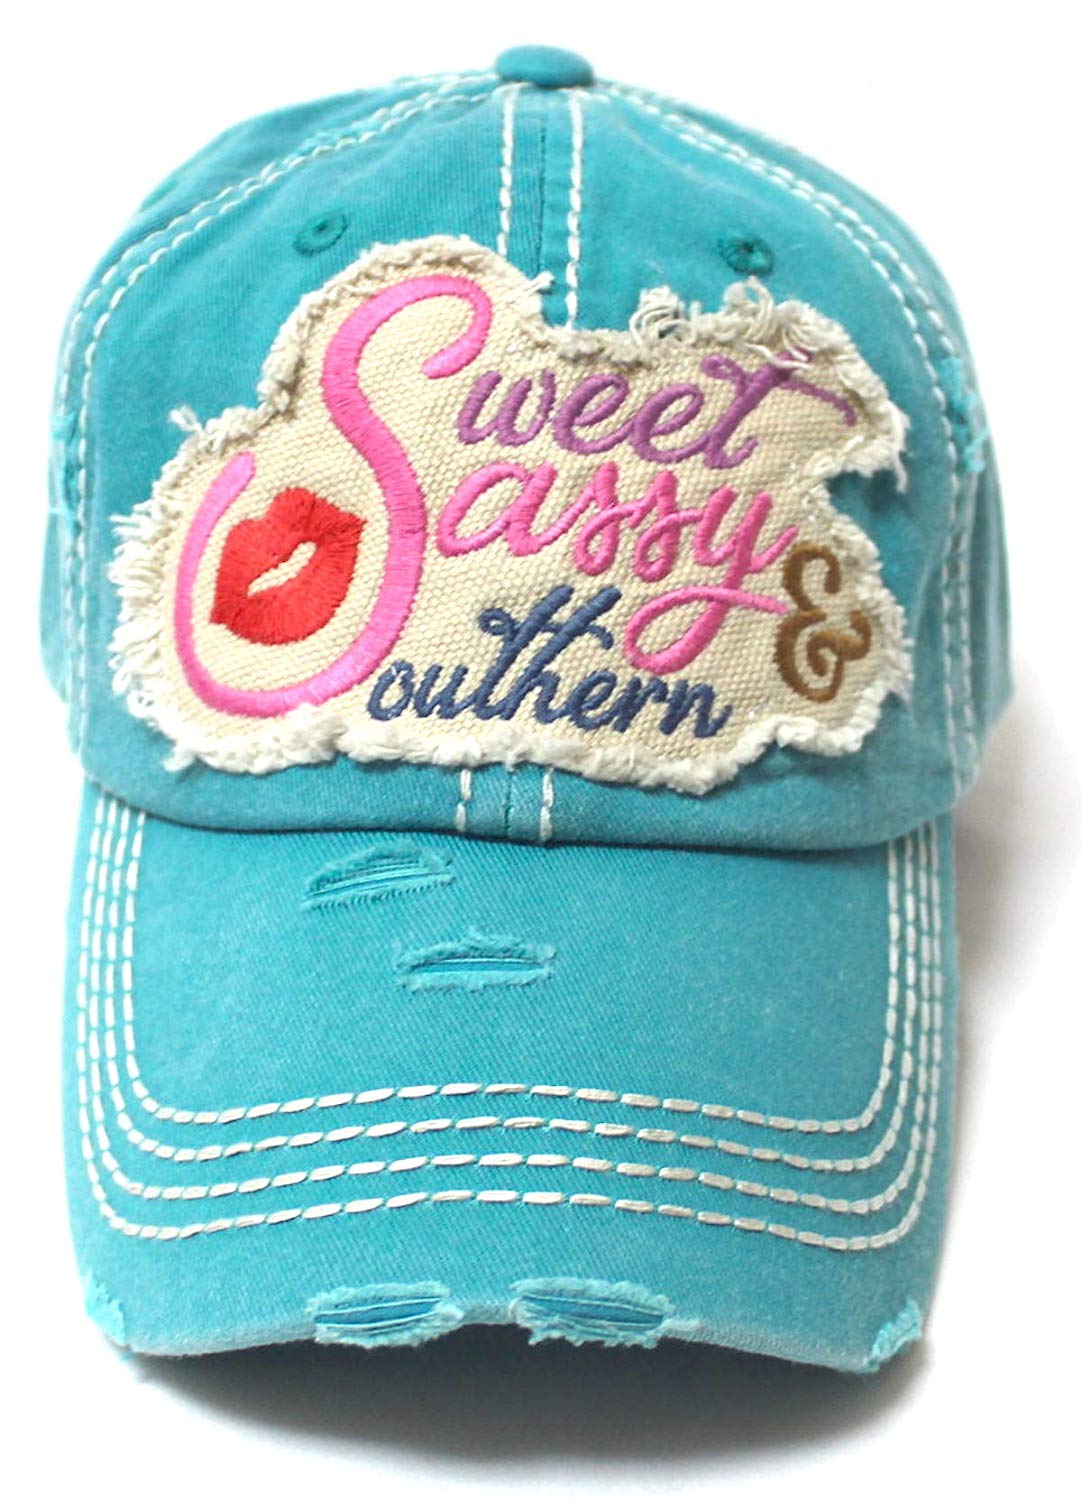 Women's Baseball Cap Sweet, Sassy & Southern Patch Embroidery Hat w/Red Kissy Lip Monogram, Turuoise - Caps 'N Vintage 